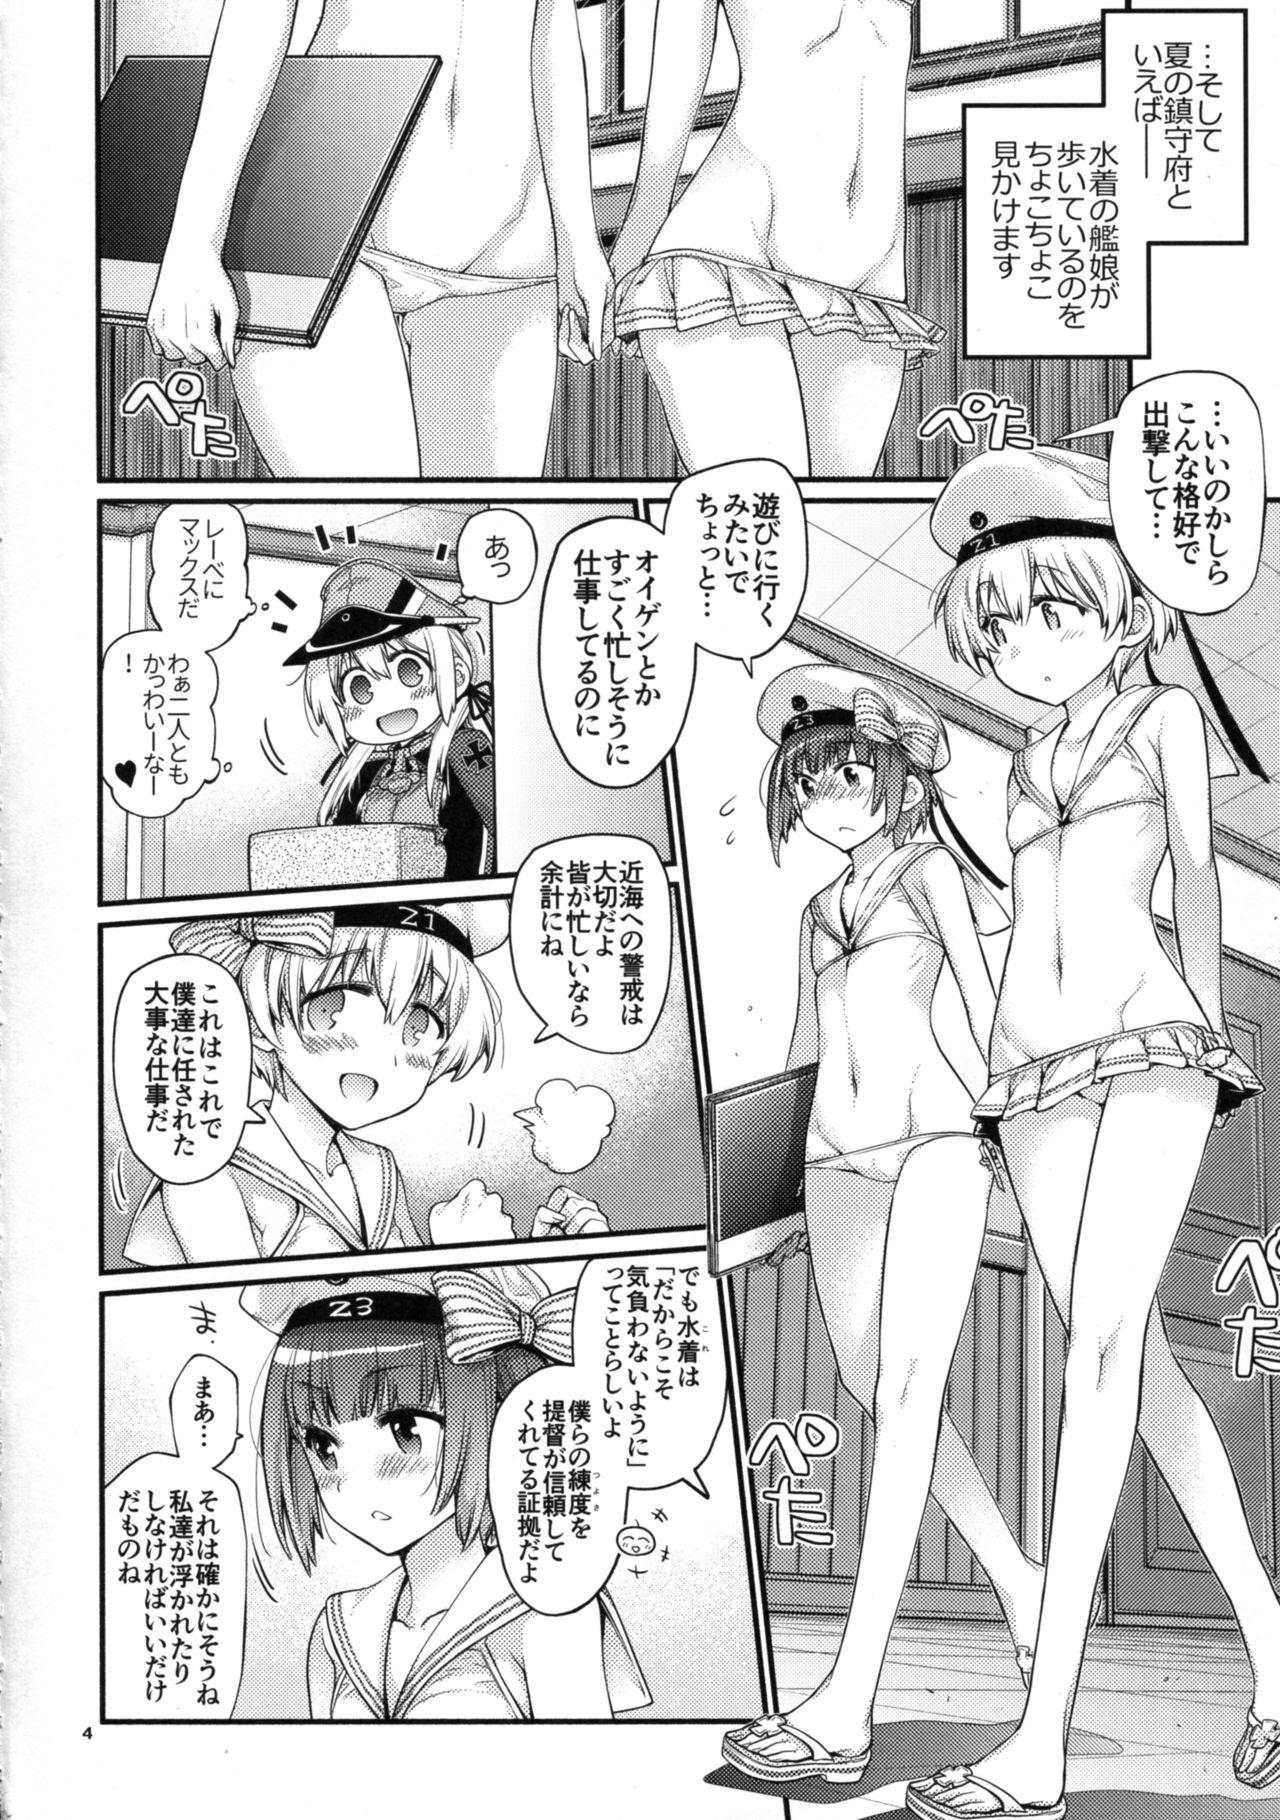 Sola Prinz Pudding 4 - Kantai collection Chat - Page 4